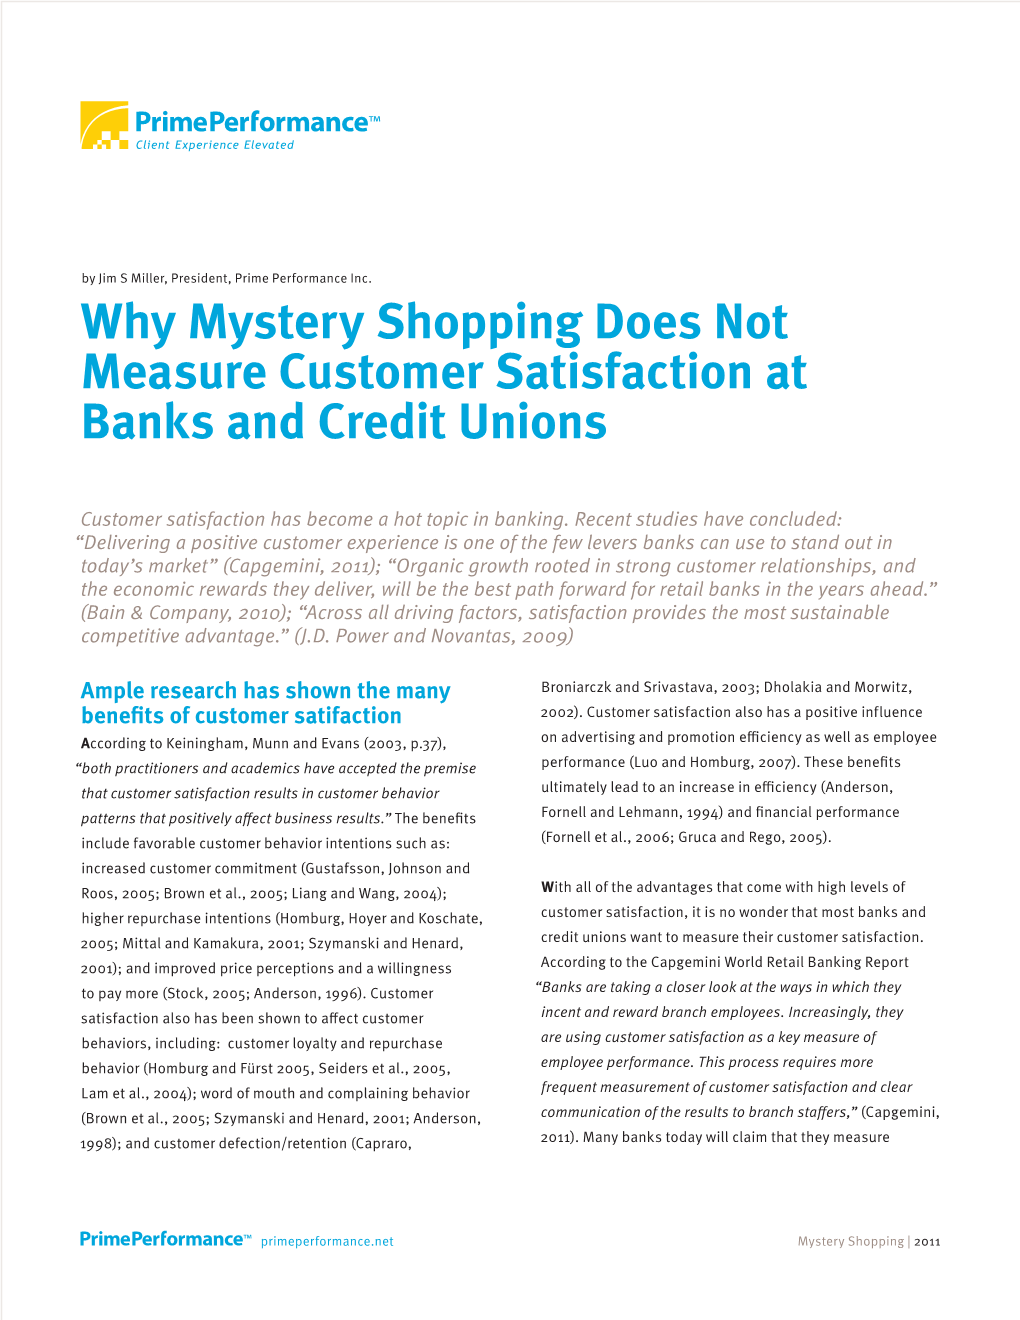 Why Mystery Shopping Does Not Measure Customer Satisfaction at Banks and Credit Unions